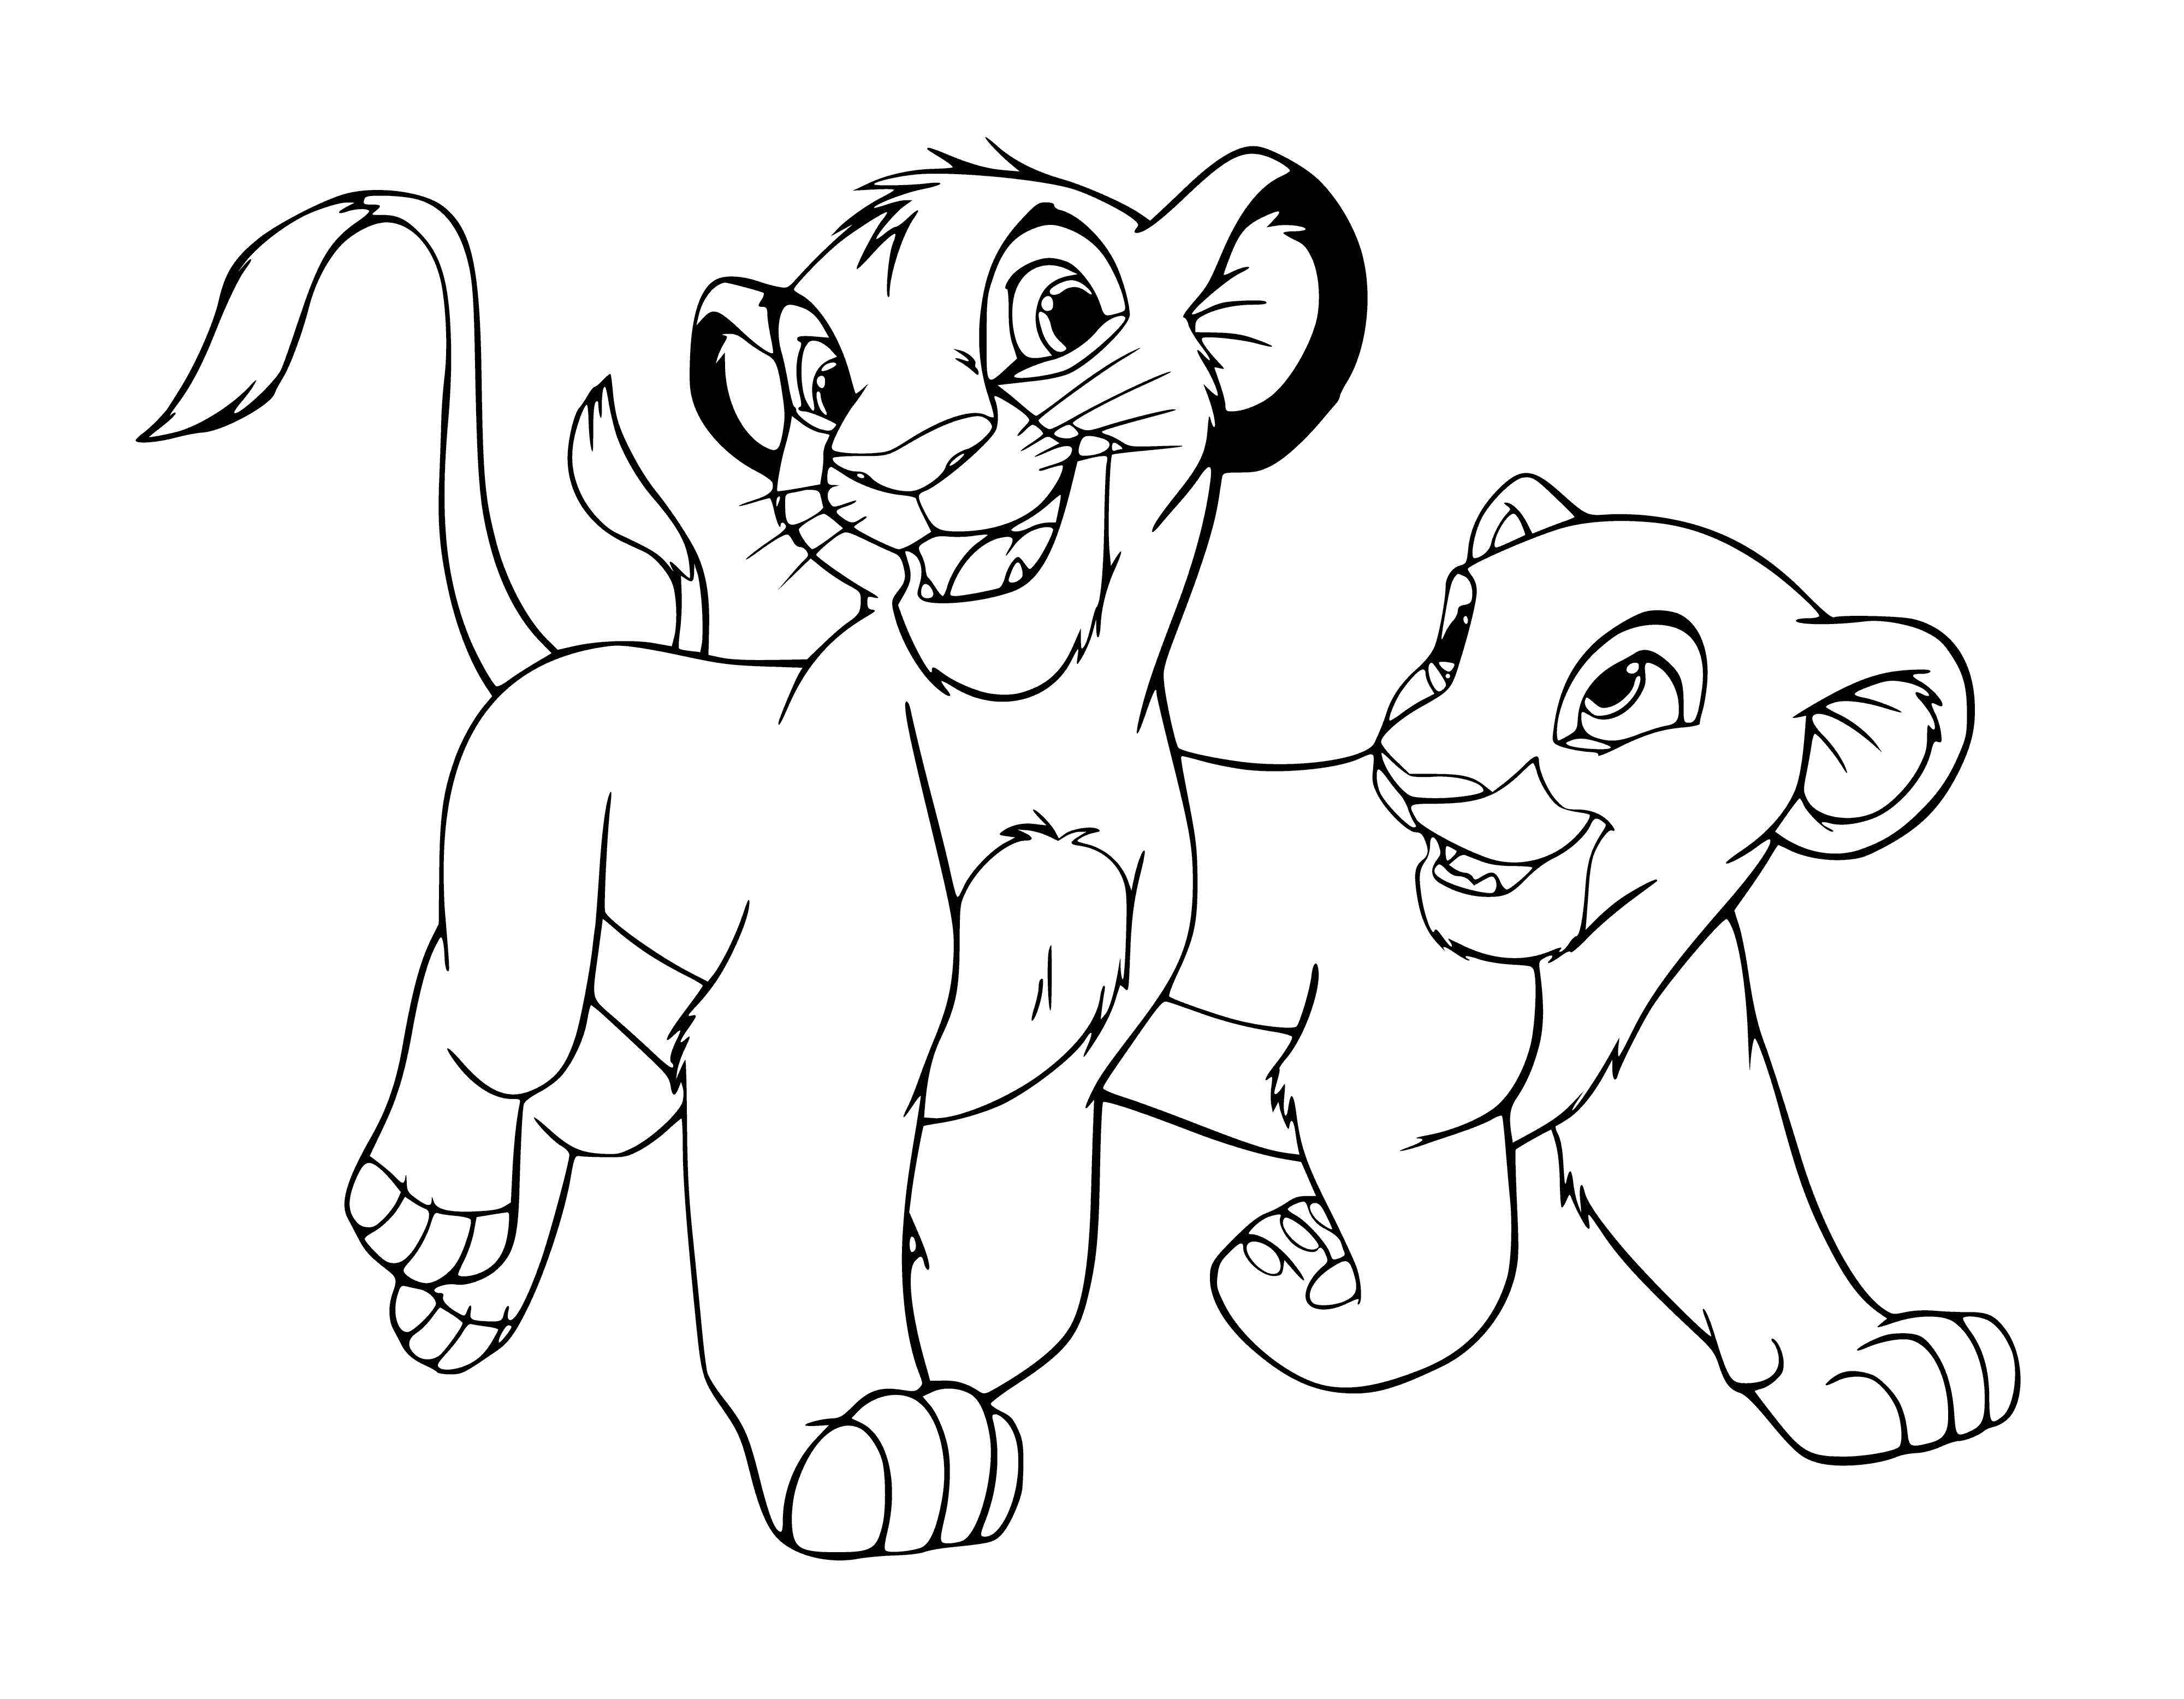 coloring page: Timon, surrounded by friends, is content and peaceful in this coloring page. #TheLionKing